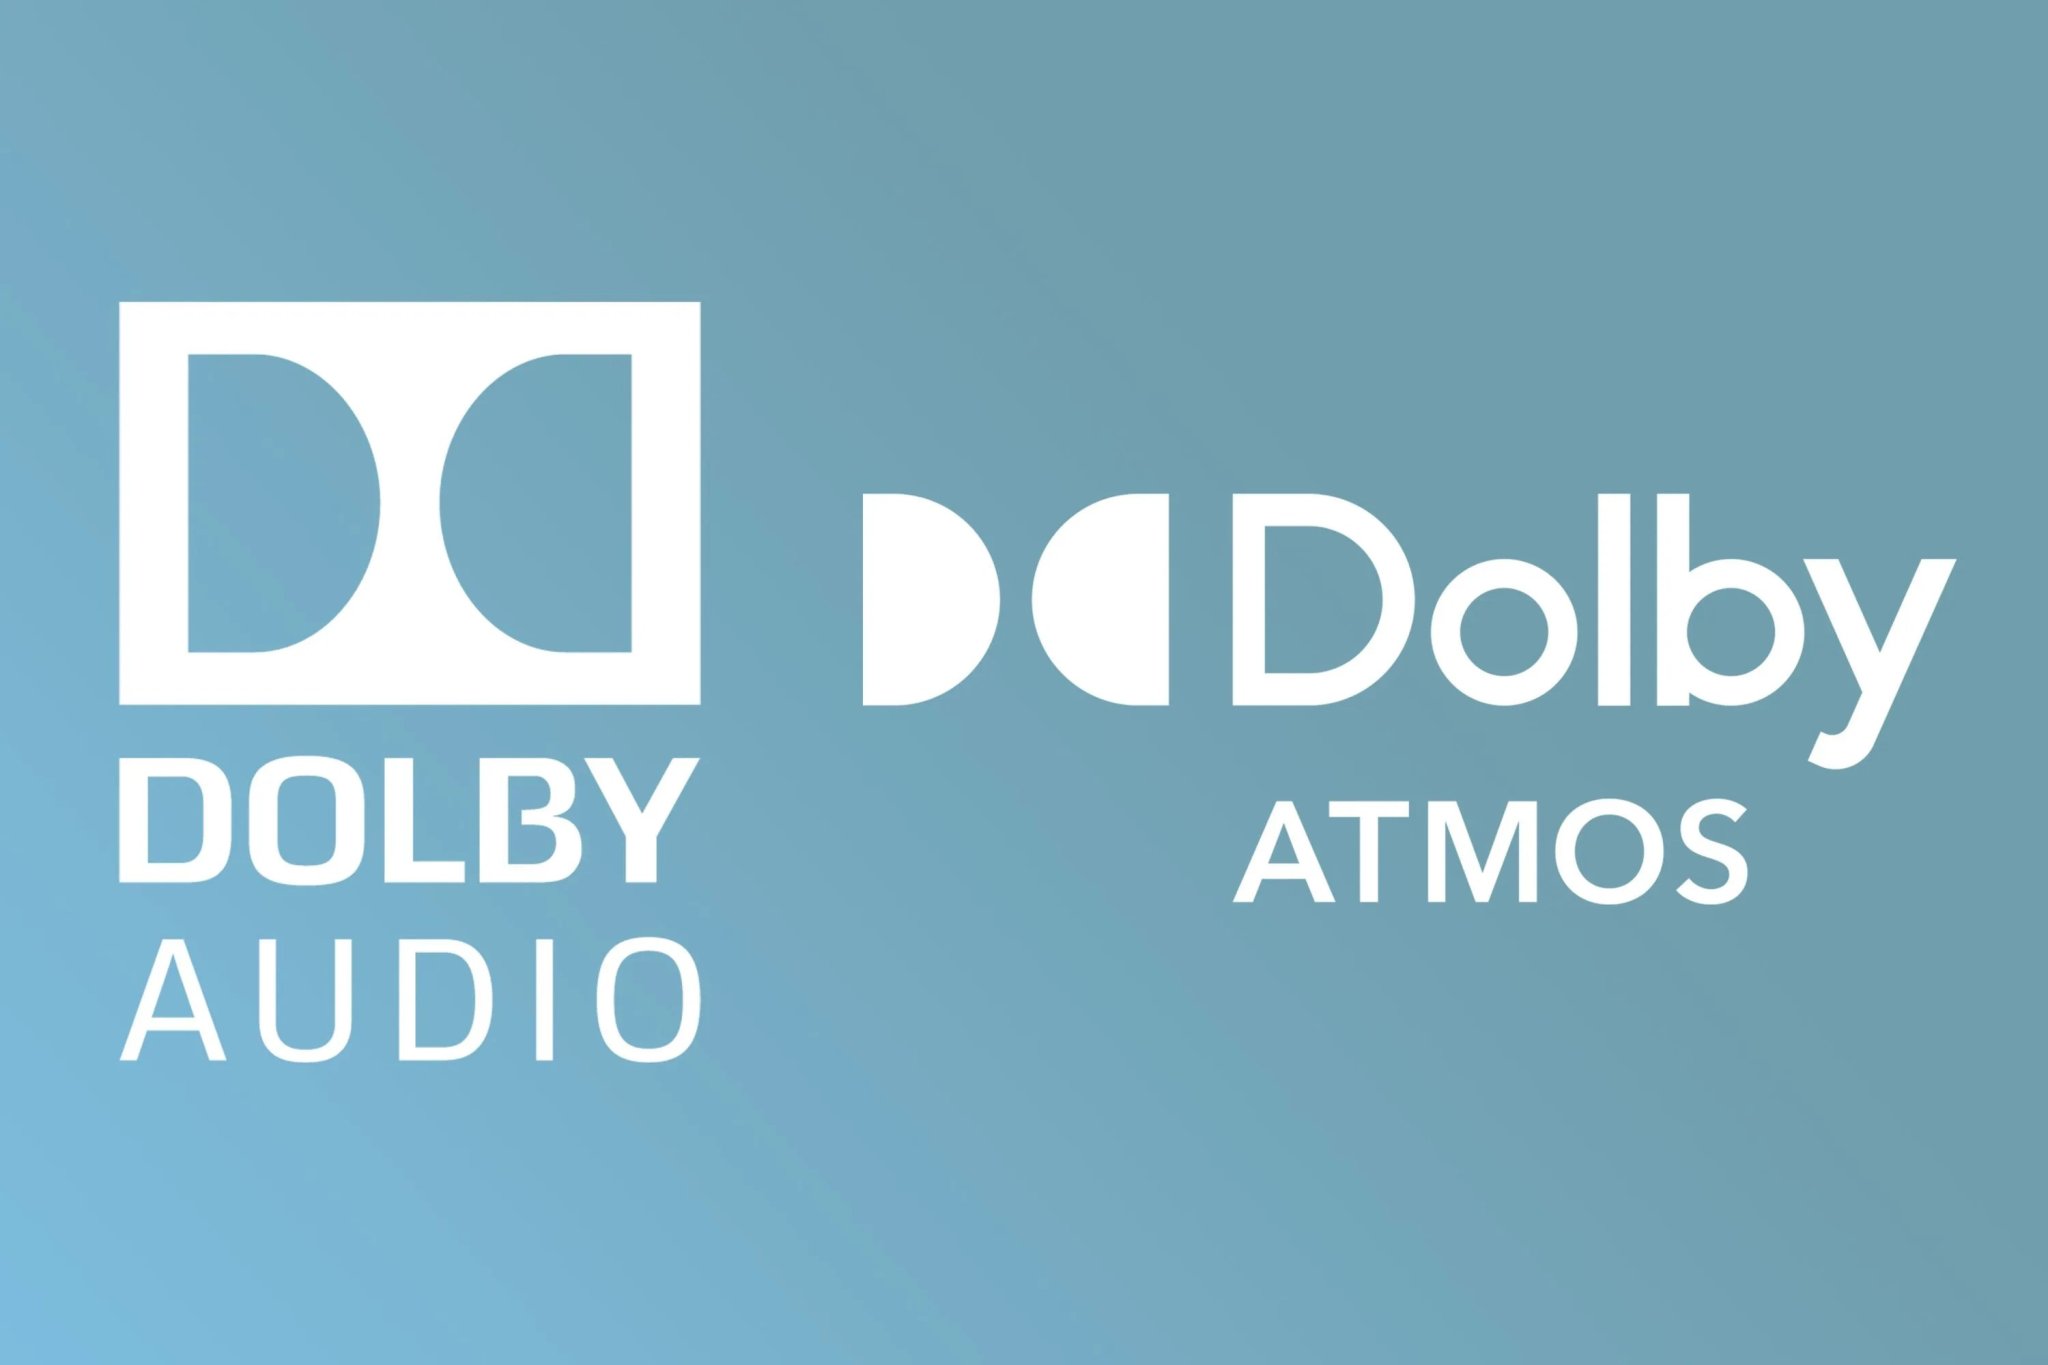 Dolby Audio vs Dolby Atmos: What’s the Difference?